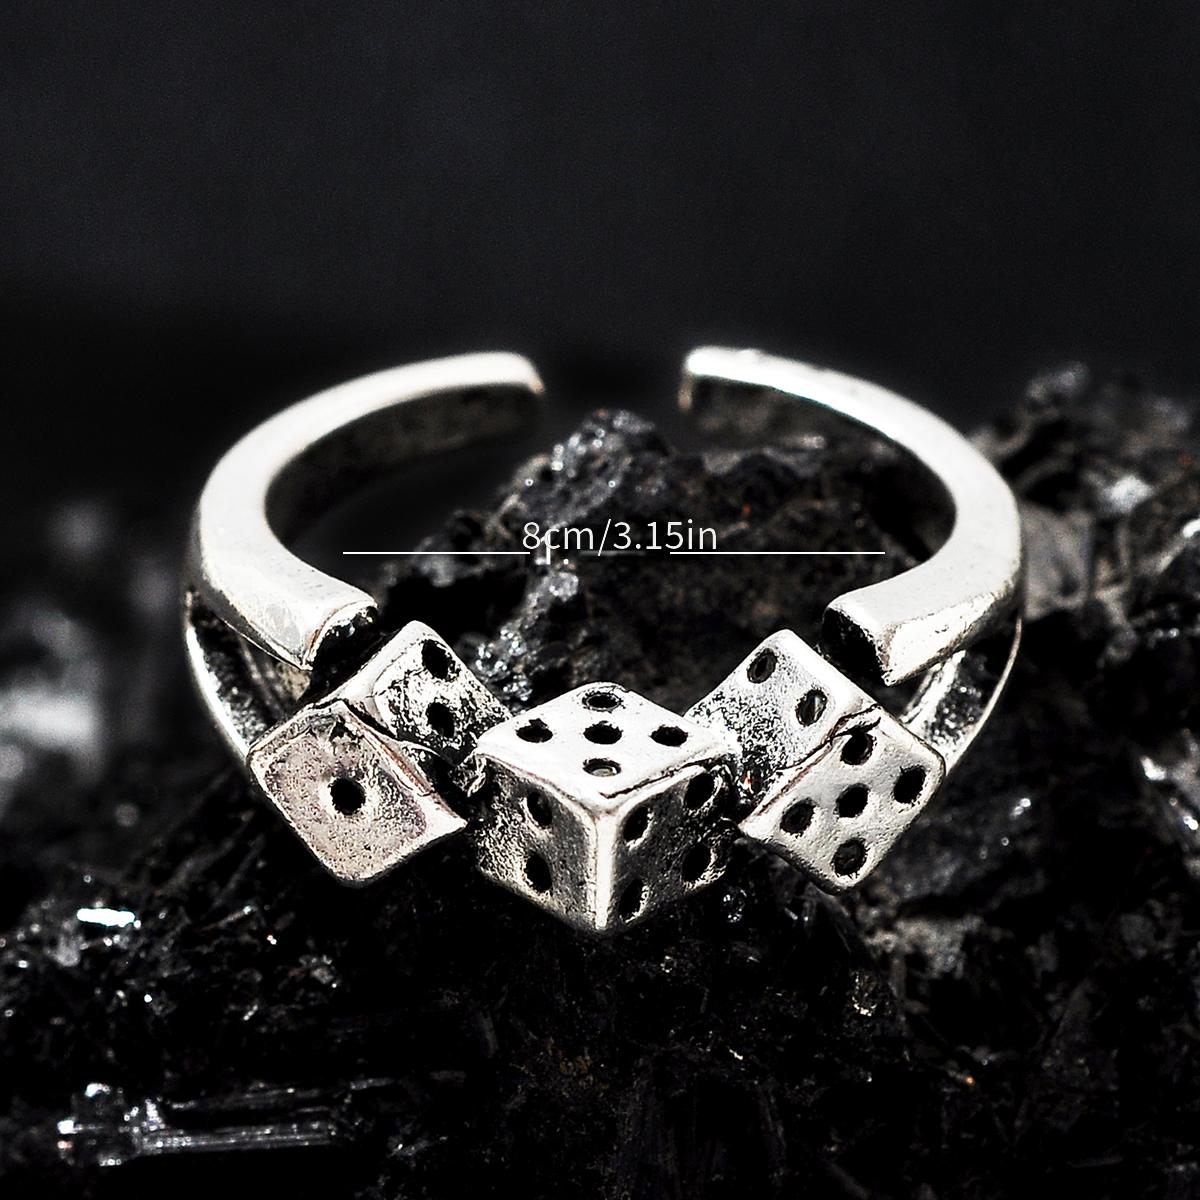 D&D Dungeons and Dragons Dice Engagement Silver Ring Diamond 